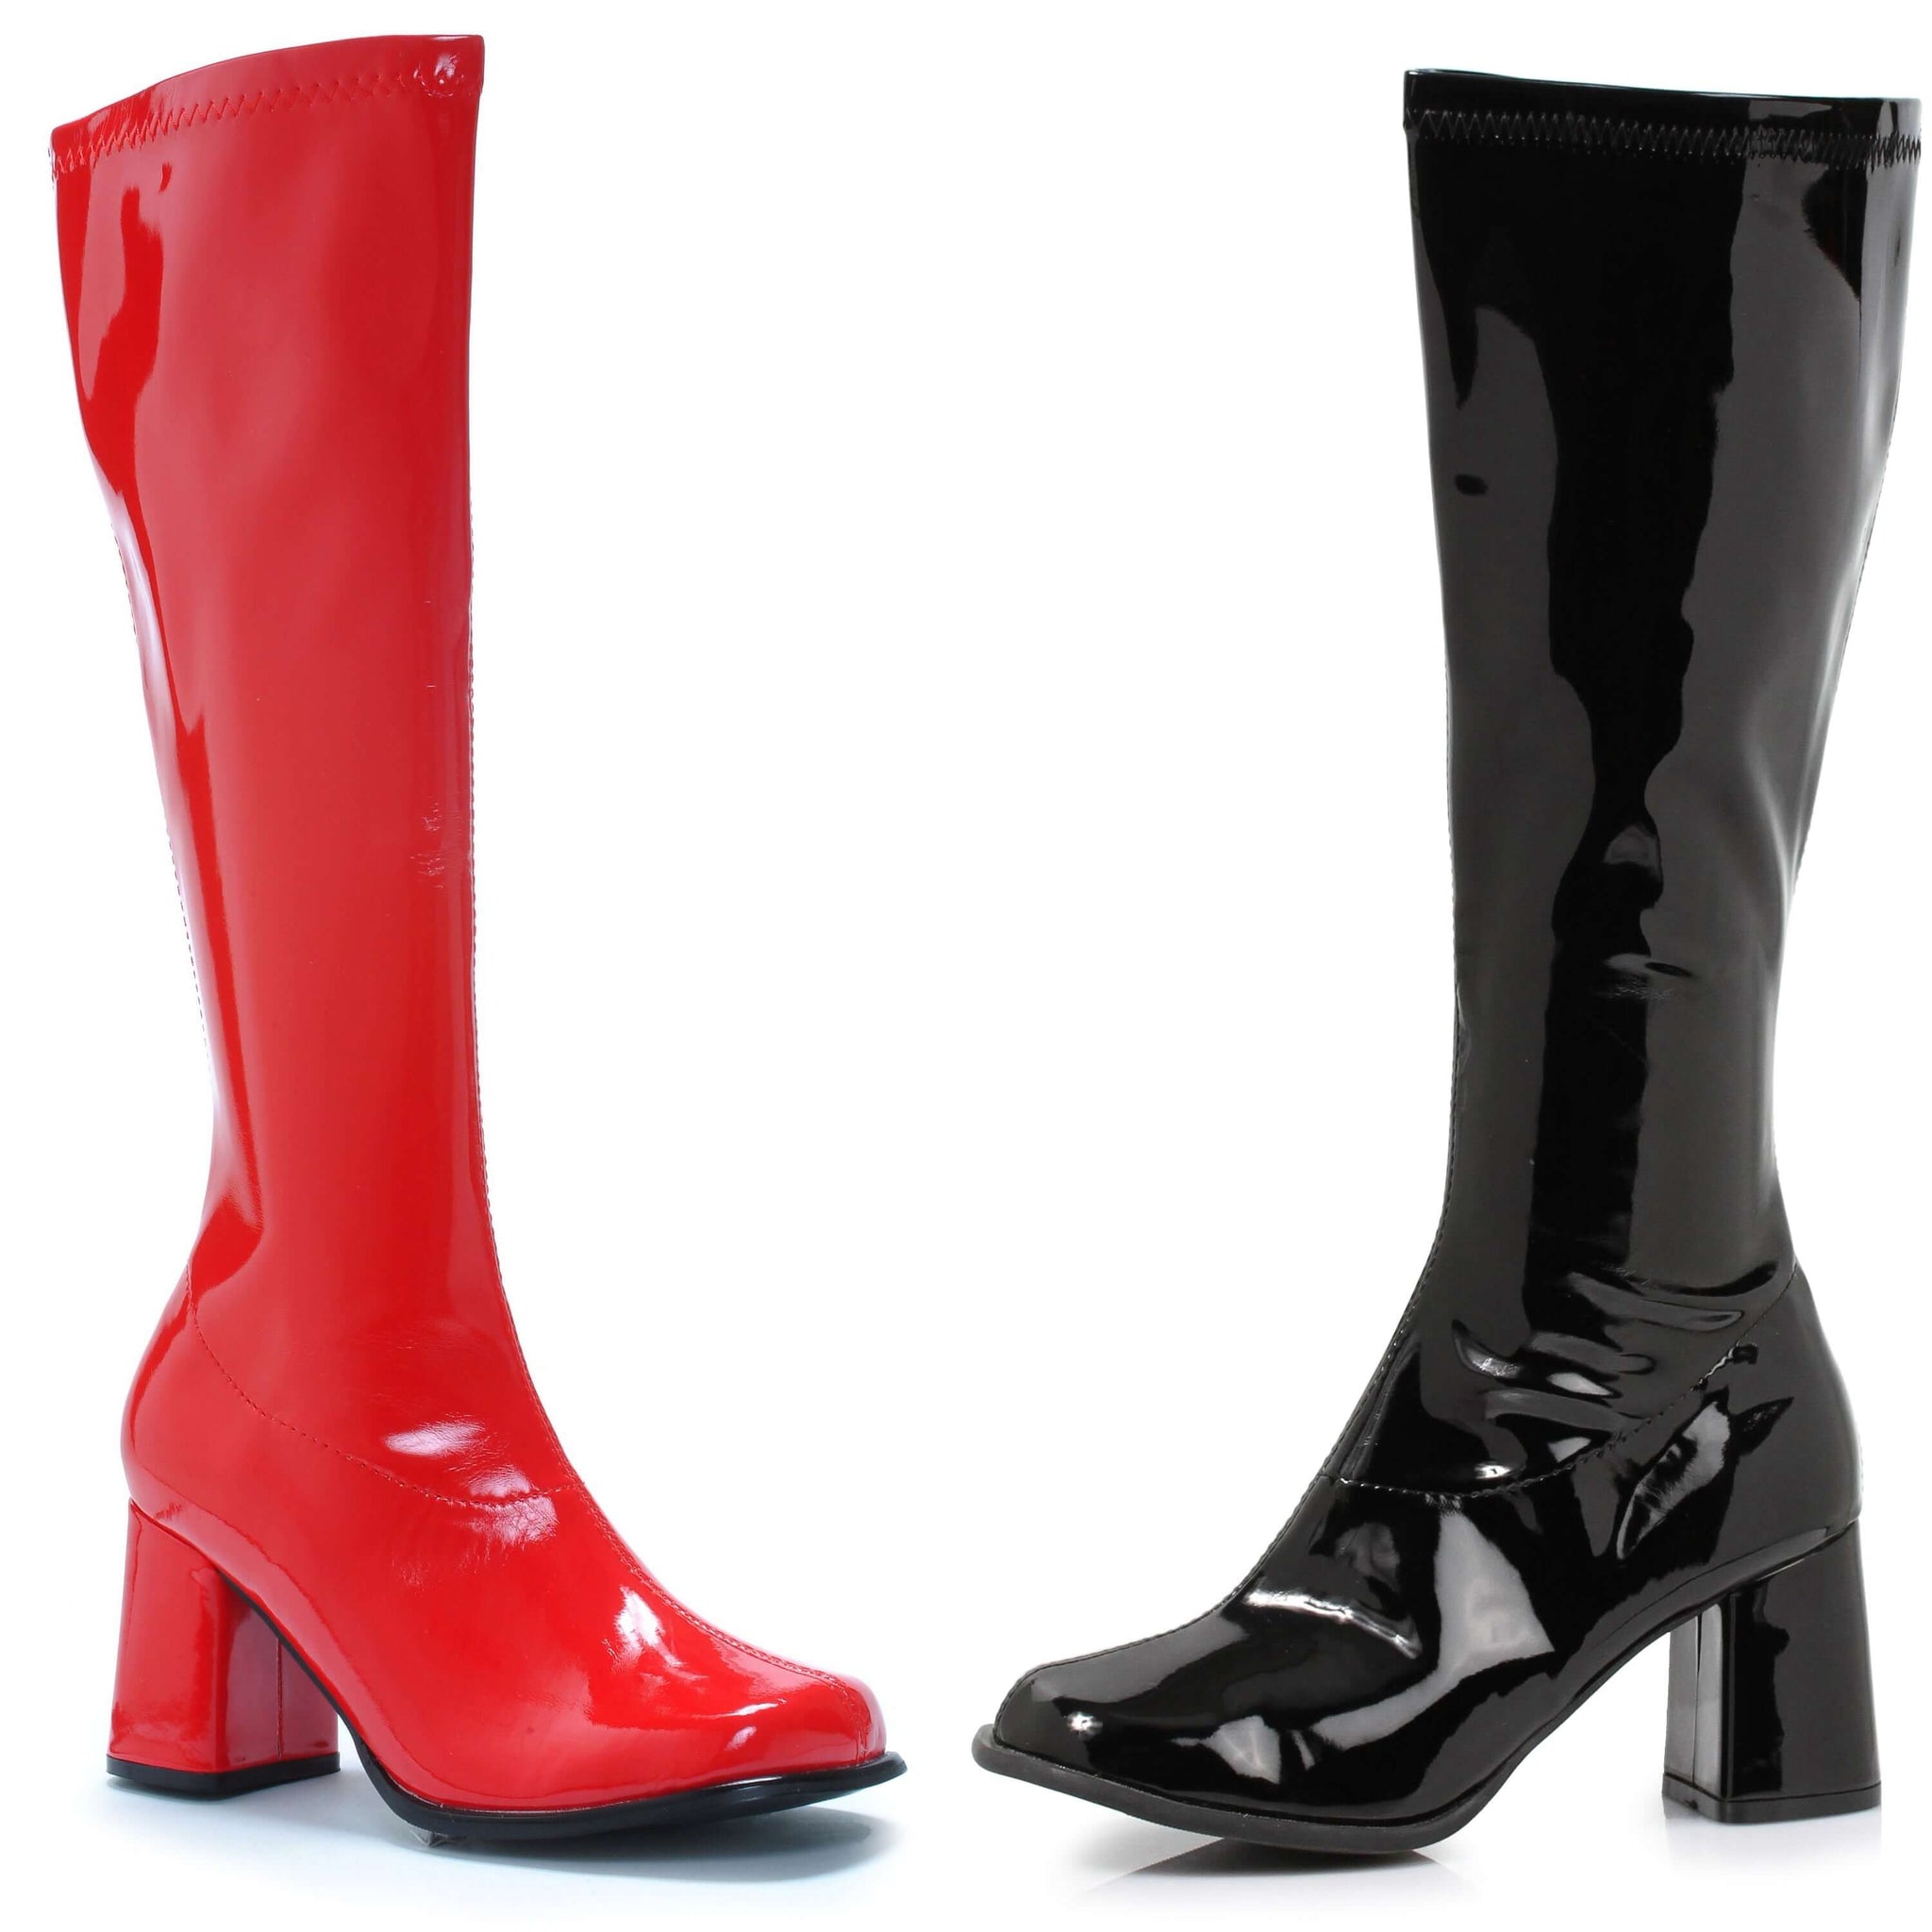 3 Knee High Boot (Blk-Left Red-Right)